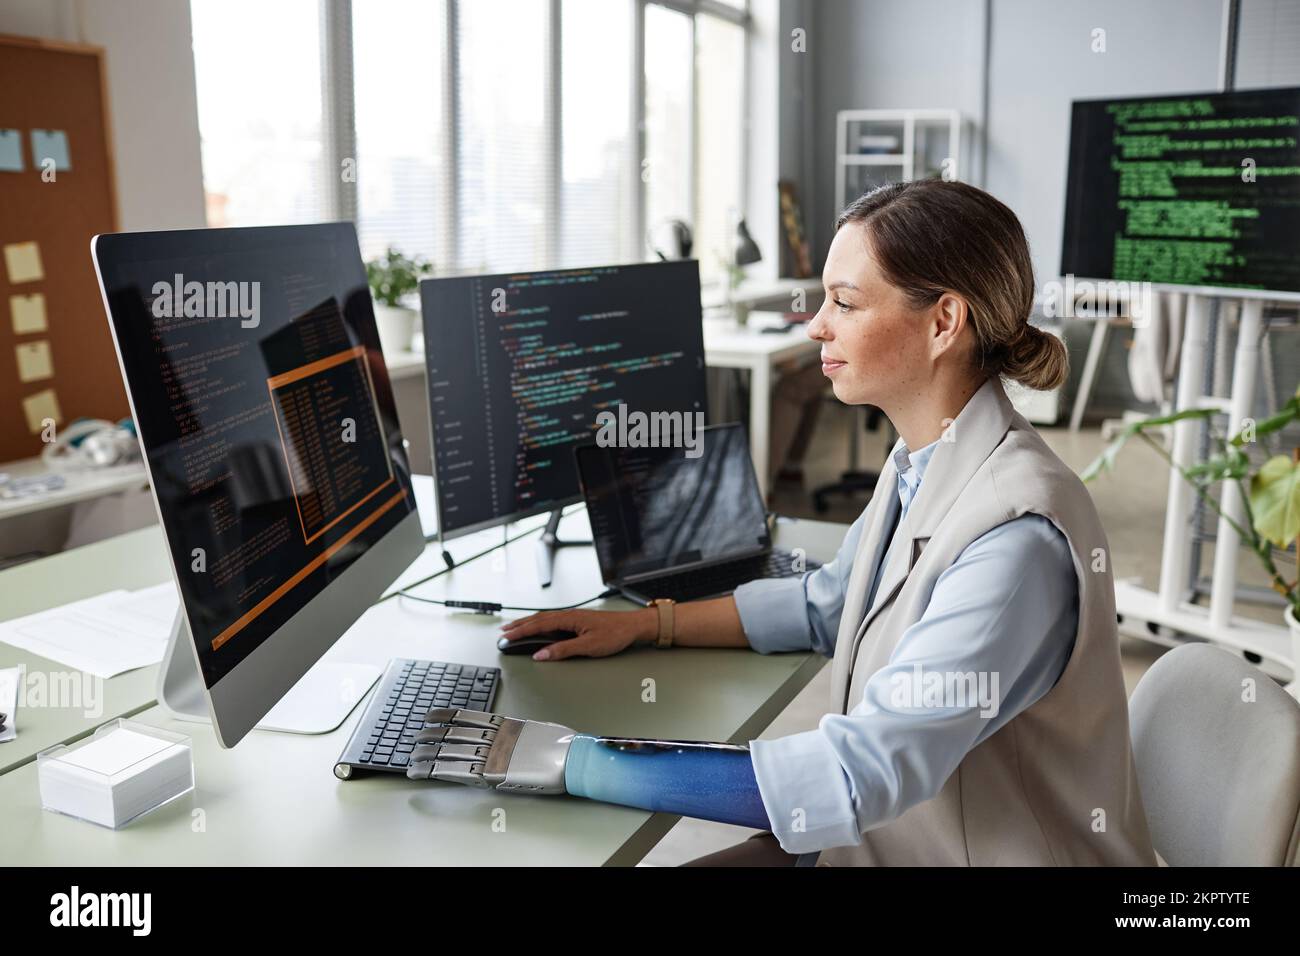 Positive software developer with bionic arm checking code on computer screen for bugs Stock Photo